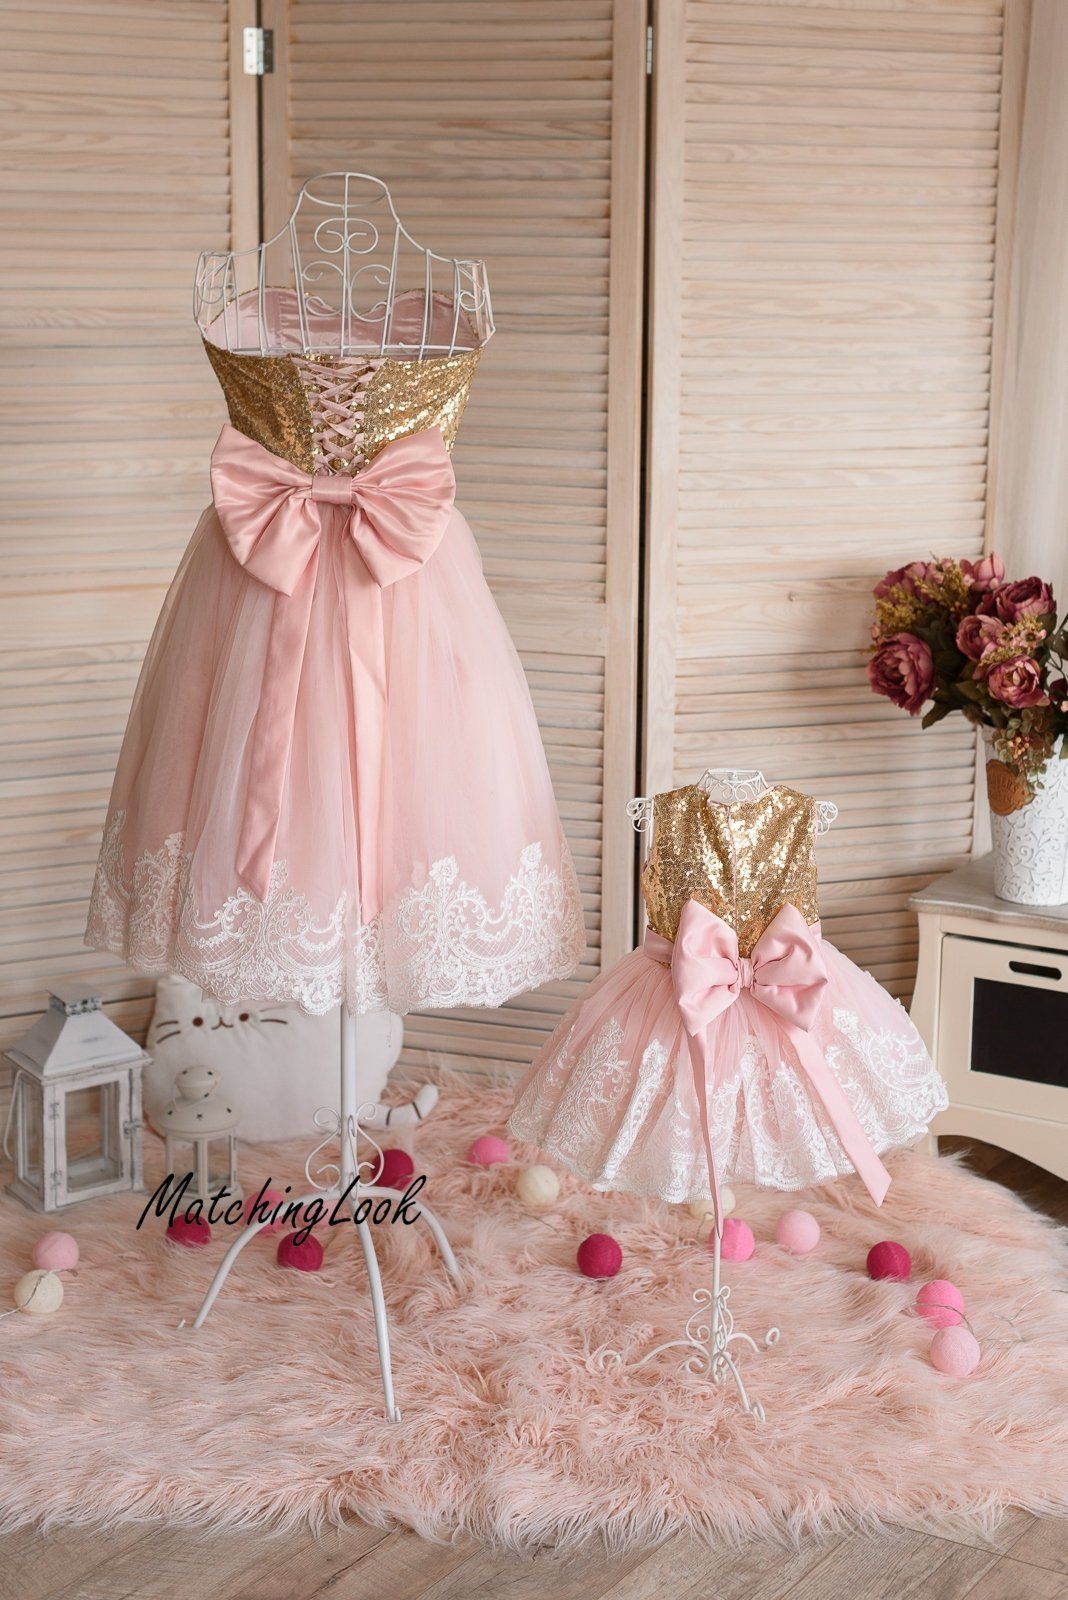 mother baby girl matching dresses